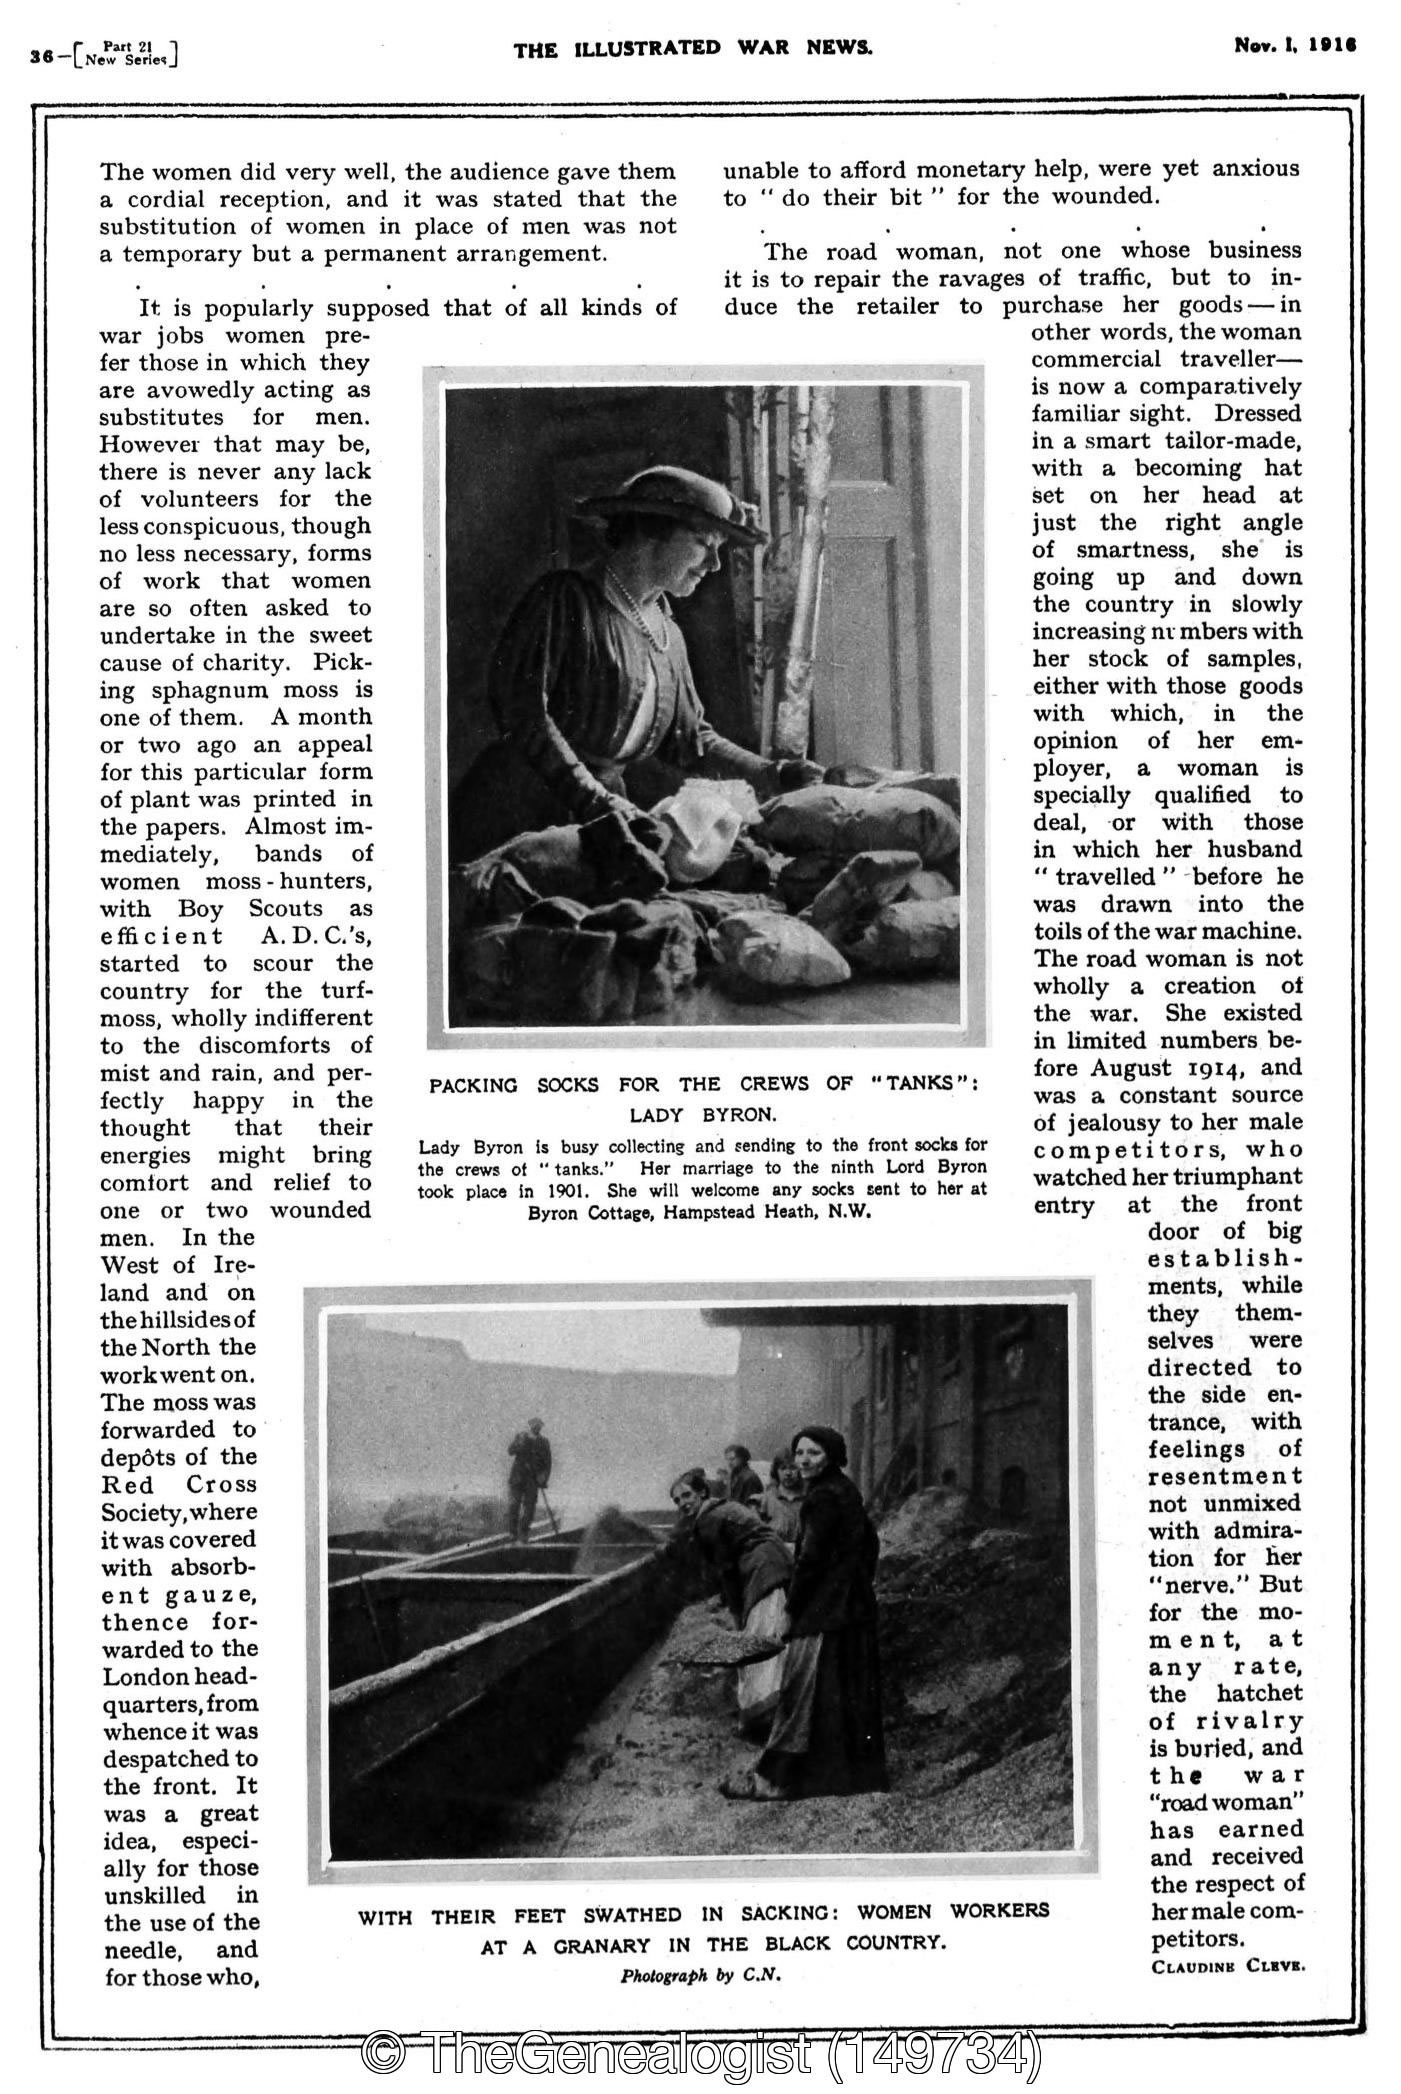 Lady Byron Packing Socks for the crews of Tanks – Illustrated War News from TheGenealogist's Newspapers &
		Magazines